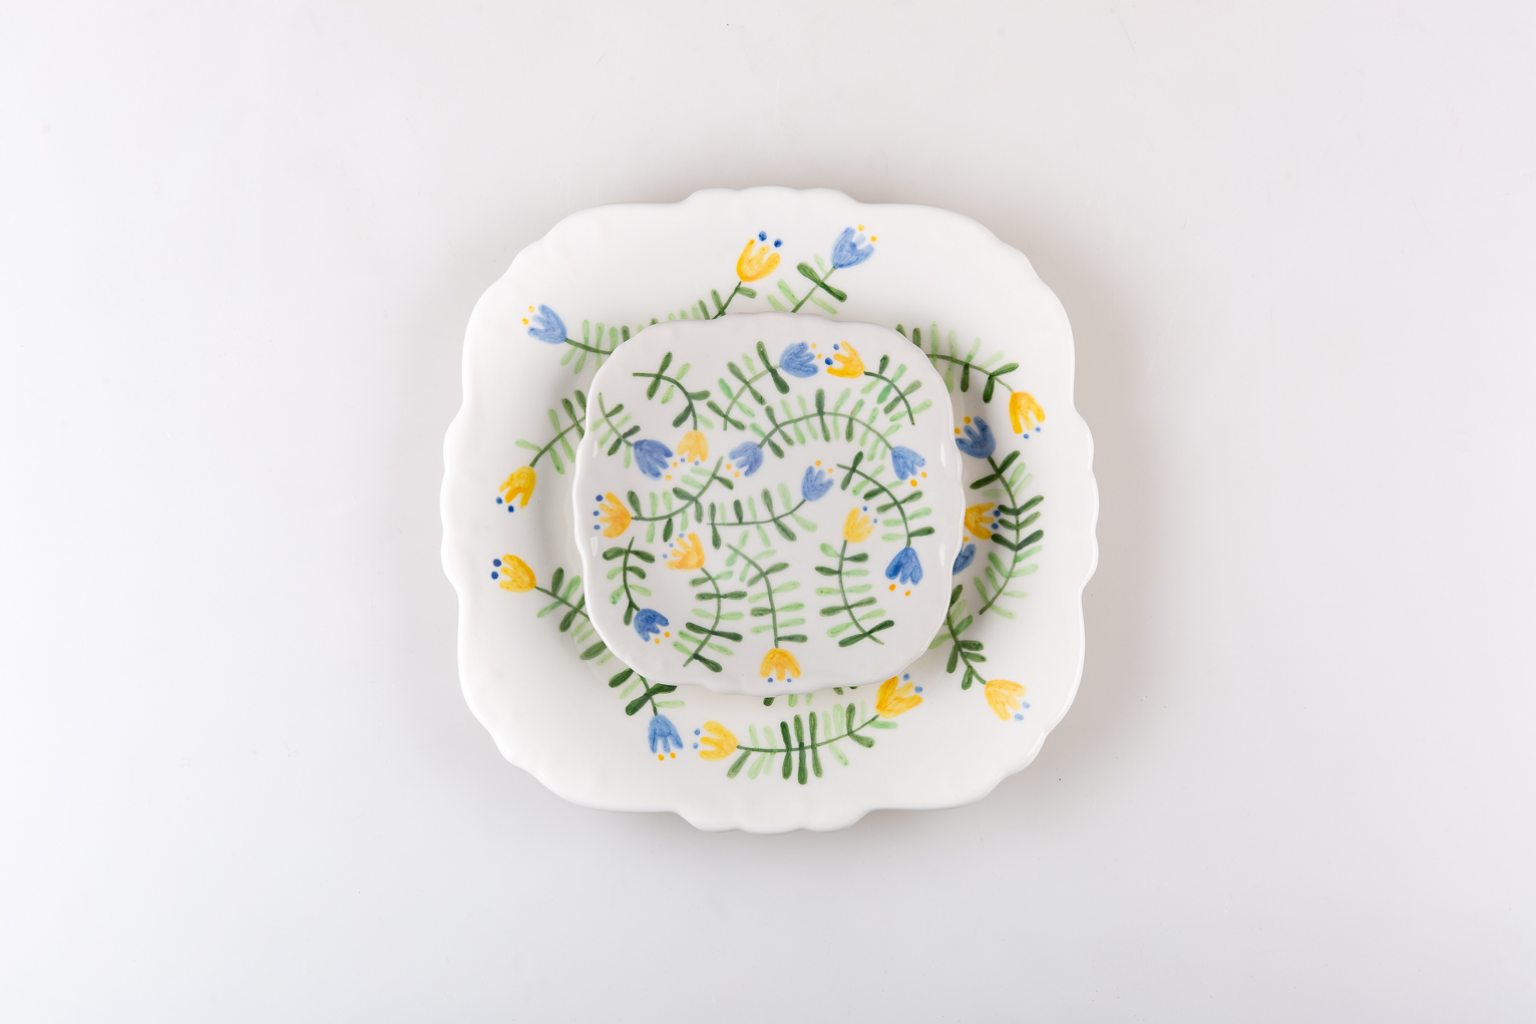 Handmade platter and matching plate with blue and yellow flowers